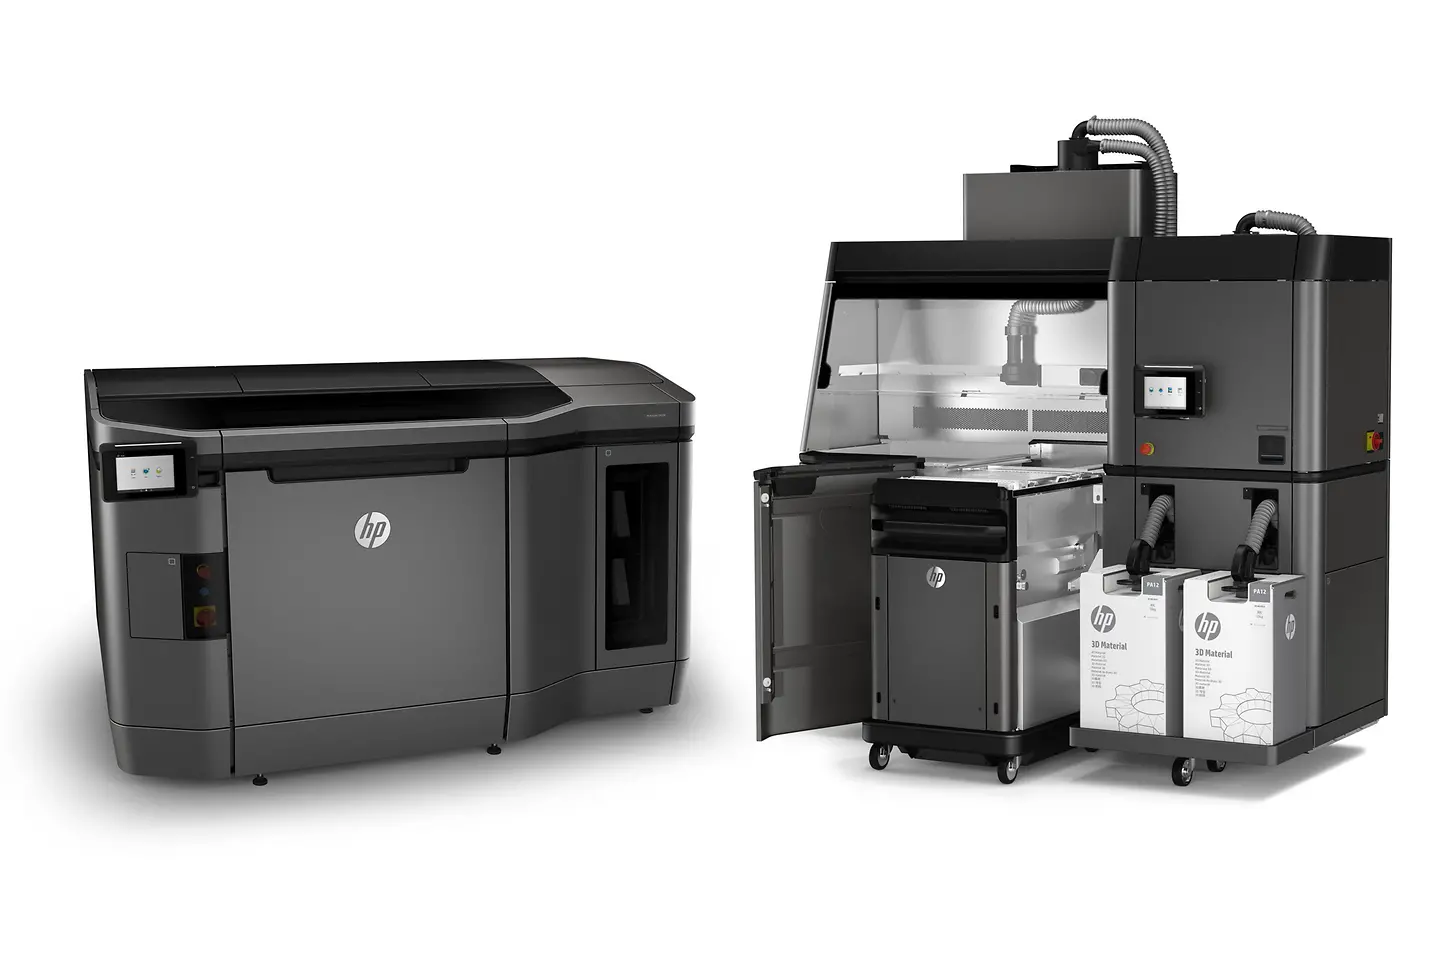 to become first reseller of Multi Jet Fusion 3D printers